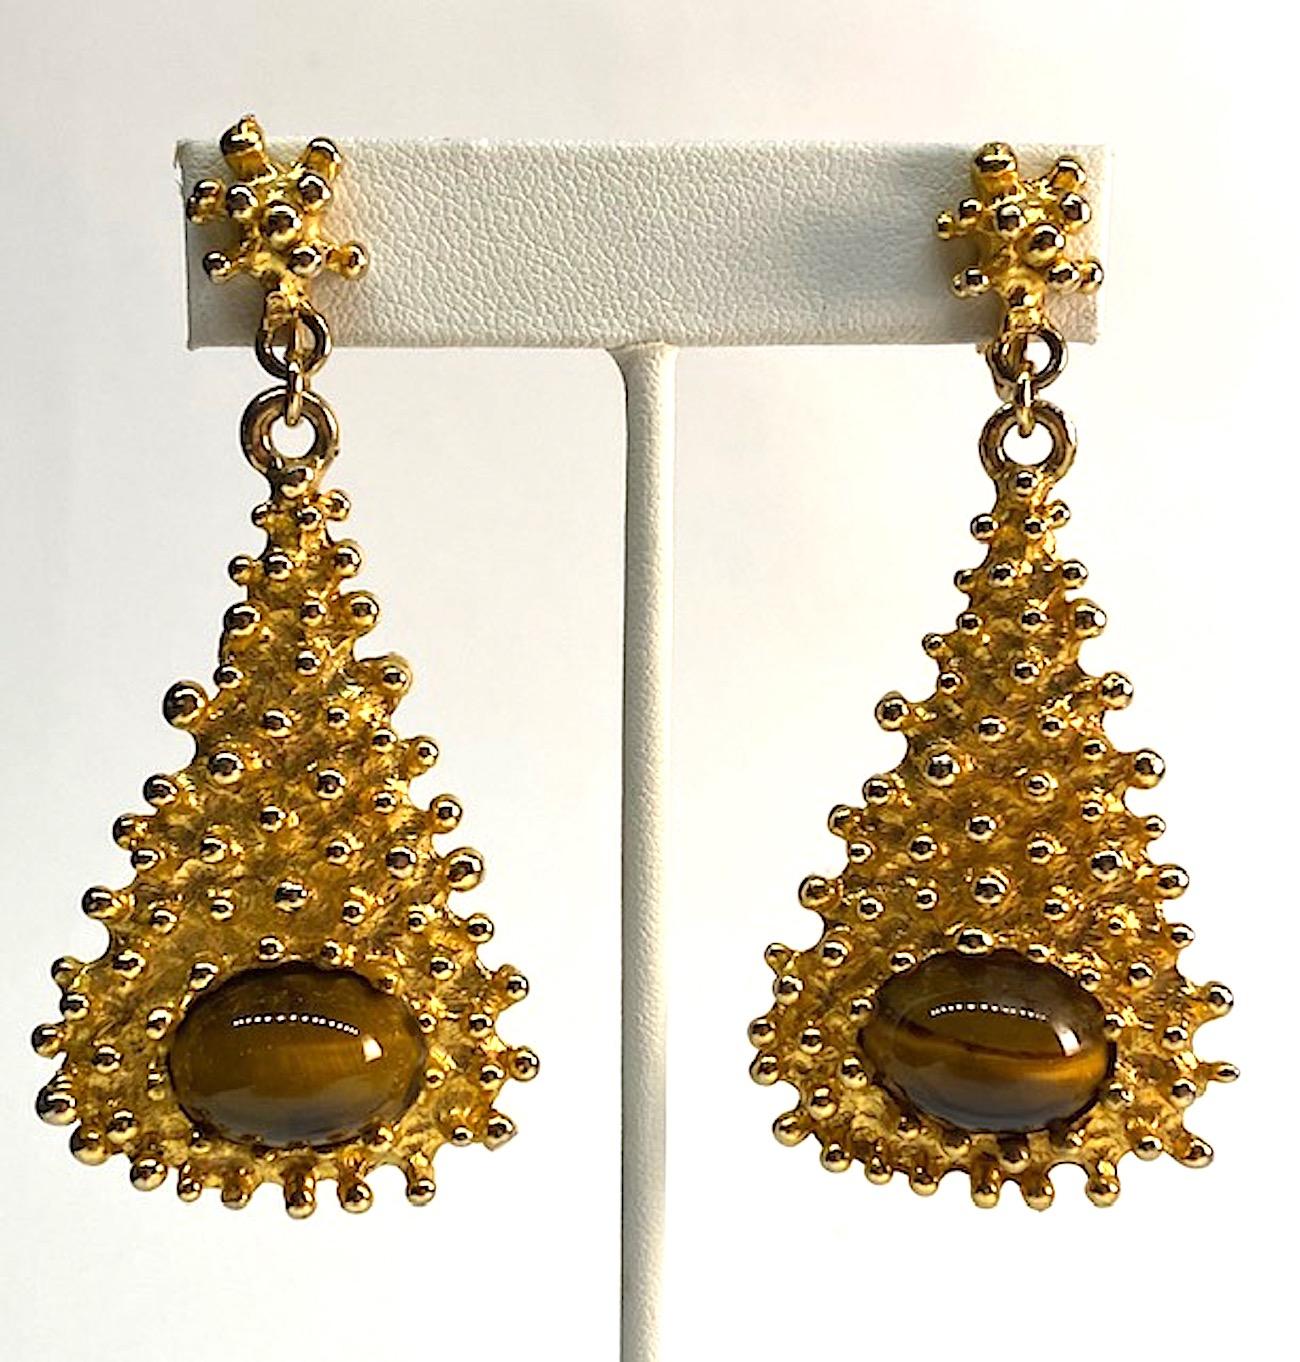 Gold nugget bead texture Kenneth Jay Lane earrings made in the mid to later 1970s. Gold tone with natural 13 x 17 mm tiger eye cabochons. Each earring is 1.5 inches wide and 3 inches long. Oval signature plaque on the back of each pendant inscribed